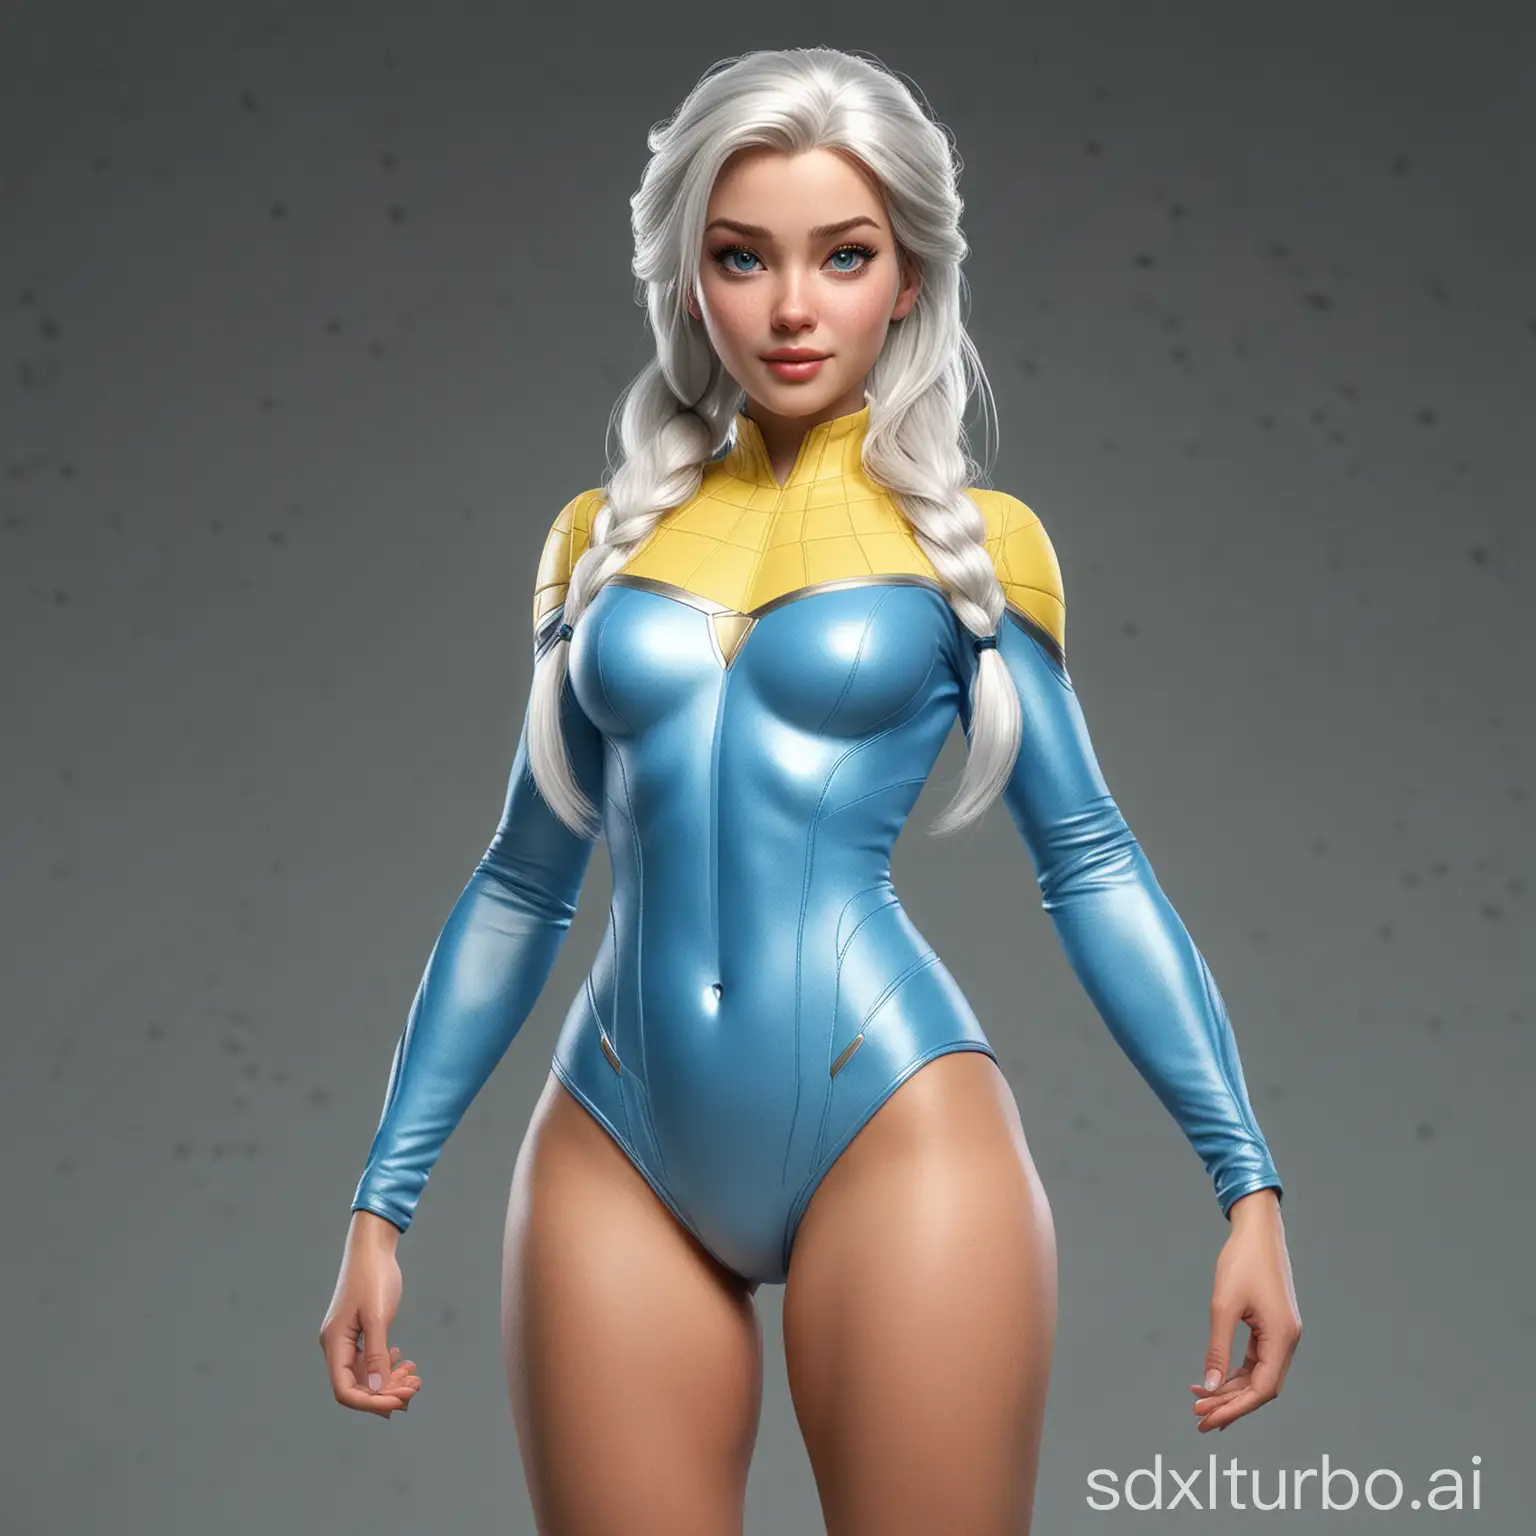 Realistic Elsa (full body) with thick fit body, X-Men tight uniform, small shoulders, big ass, freckles on face with blue and yellow suit, sexy lips and white hair big tits tall sexy woman long muscular legs. frontal pose young baby face with crystal blue eyes. pear shaped body. bottom part of the body really big wider and top part of the body smaller.